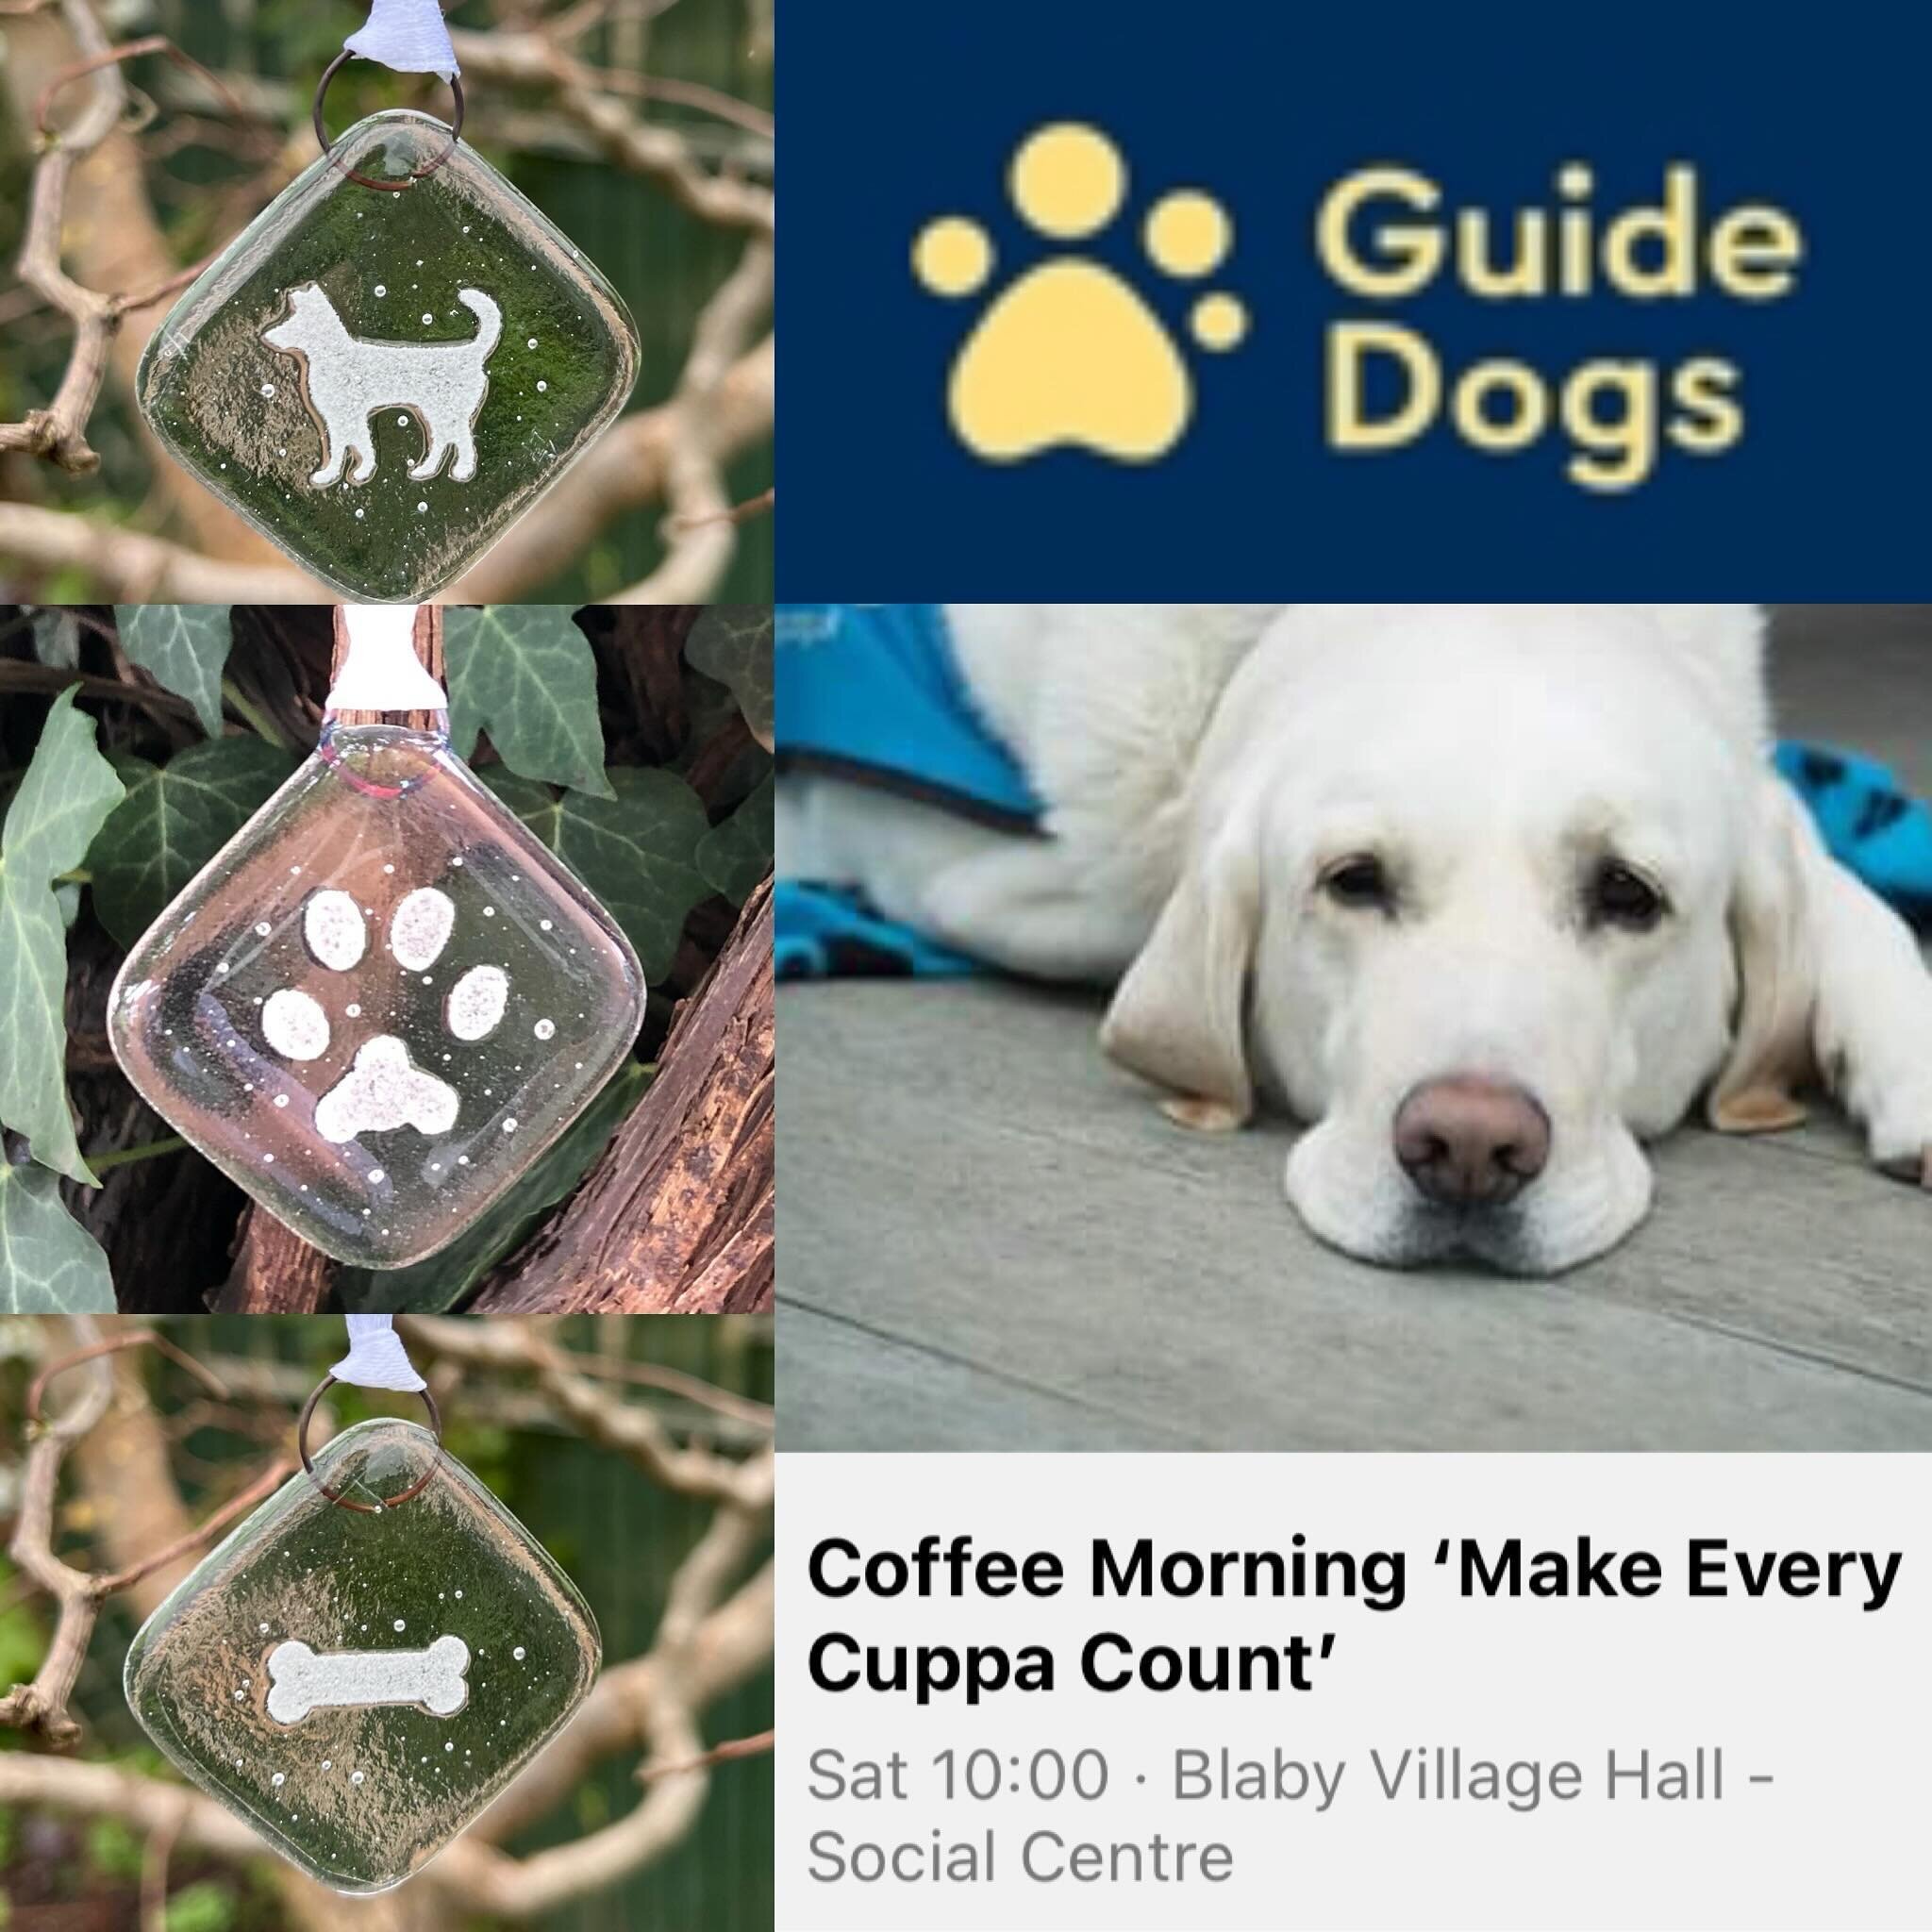 For anyone out and about in Blaby, Leicestershire this morning, Guide Dogs are holding a coffee morning fundraiser at Blaby Village Hall. Meet the guide dogs, their owners and trainers, treat yourself to a slice of cake and peruse the wares on offer.